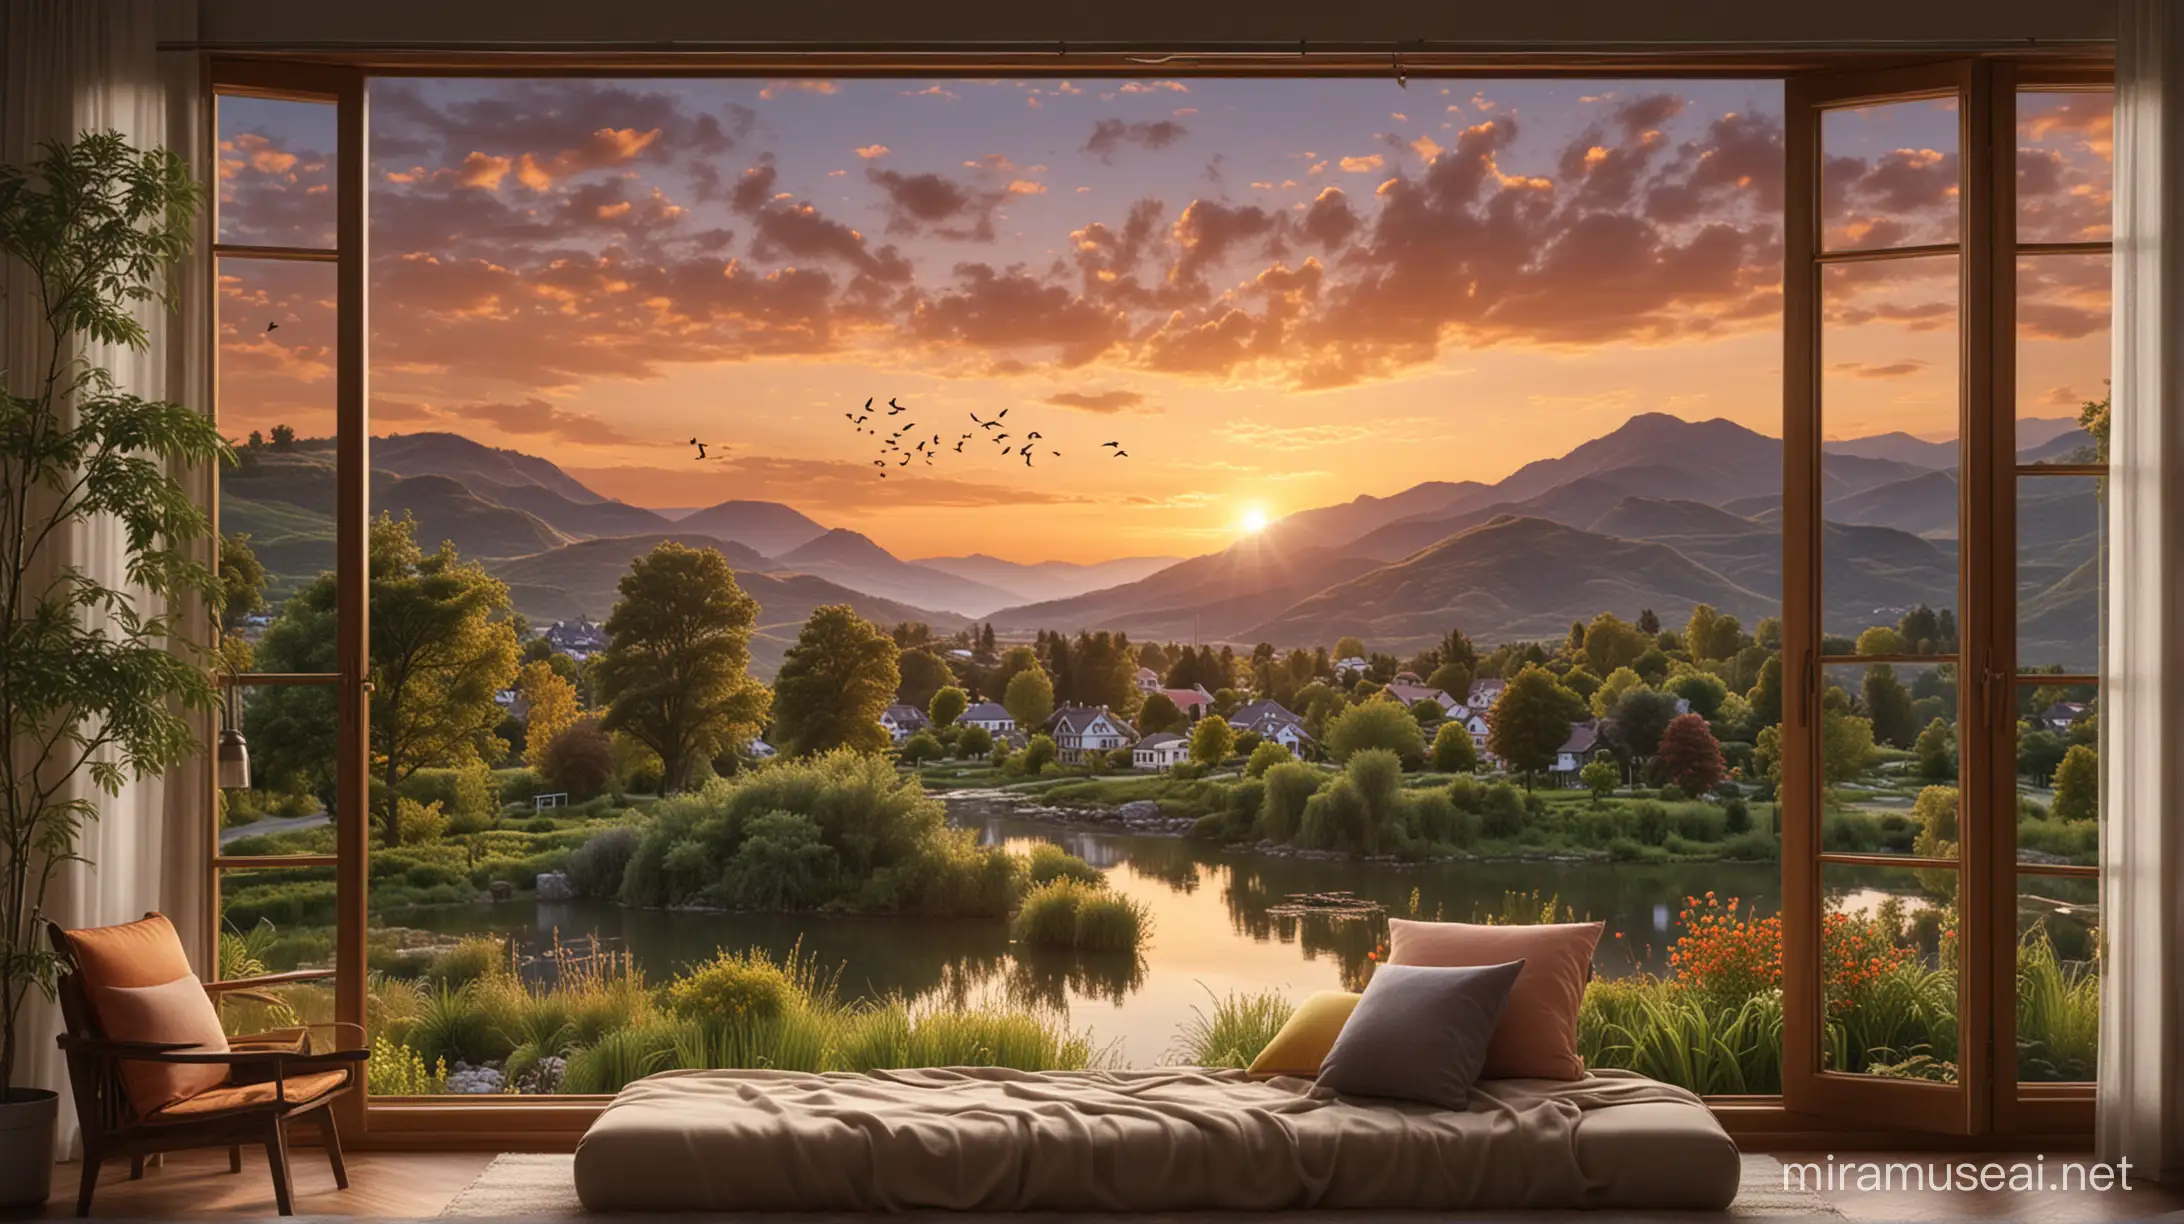 Transform your living space into a window to the world with Canon's cutting-edge new camera model. Envision a stunning landscape portrait adorning your wall, capturing the serene beauty of a sunset vista. Majestic mountains rise in the distance, their peaks aglow with the warm hues of twilight. Below, a transparent river winds its way through the verdant valley, reflecting the colors of the setting sun. A charming house nestled among lush greenery adds a touch of coziness to the scene, while wispy clouds drift lazily across the sky.

In the foreground, a scattering of birds gracefully traverse the evening sky, their silhouettes adding movement and life to the tableau. Your task is to create an HD image that seamlessly blends these elements, transporting viewers to a tranquil natural setting right in the comfort of their own home. Let the beauty of this sunset panorama captivate and inspire, showcasing the unparalleled clarity and richness of colors that Canon's newest camera model can capture.